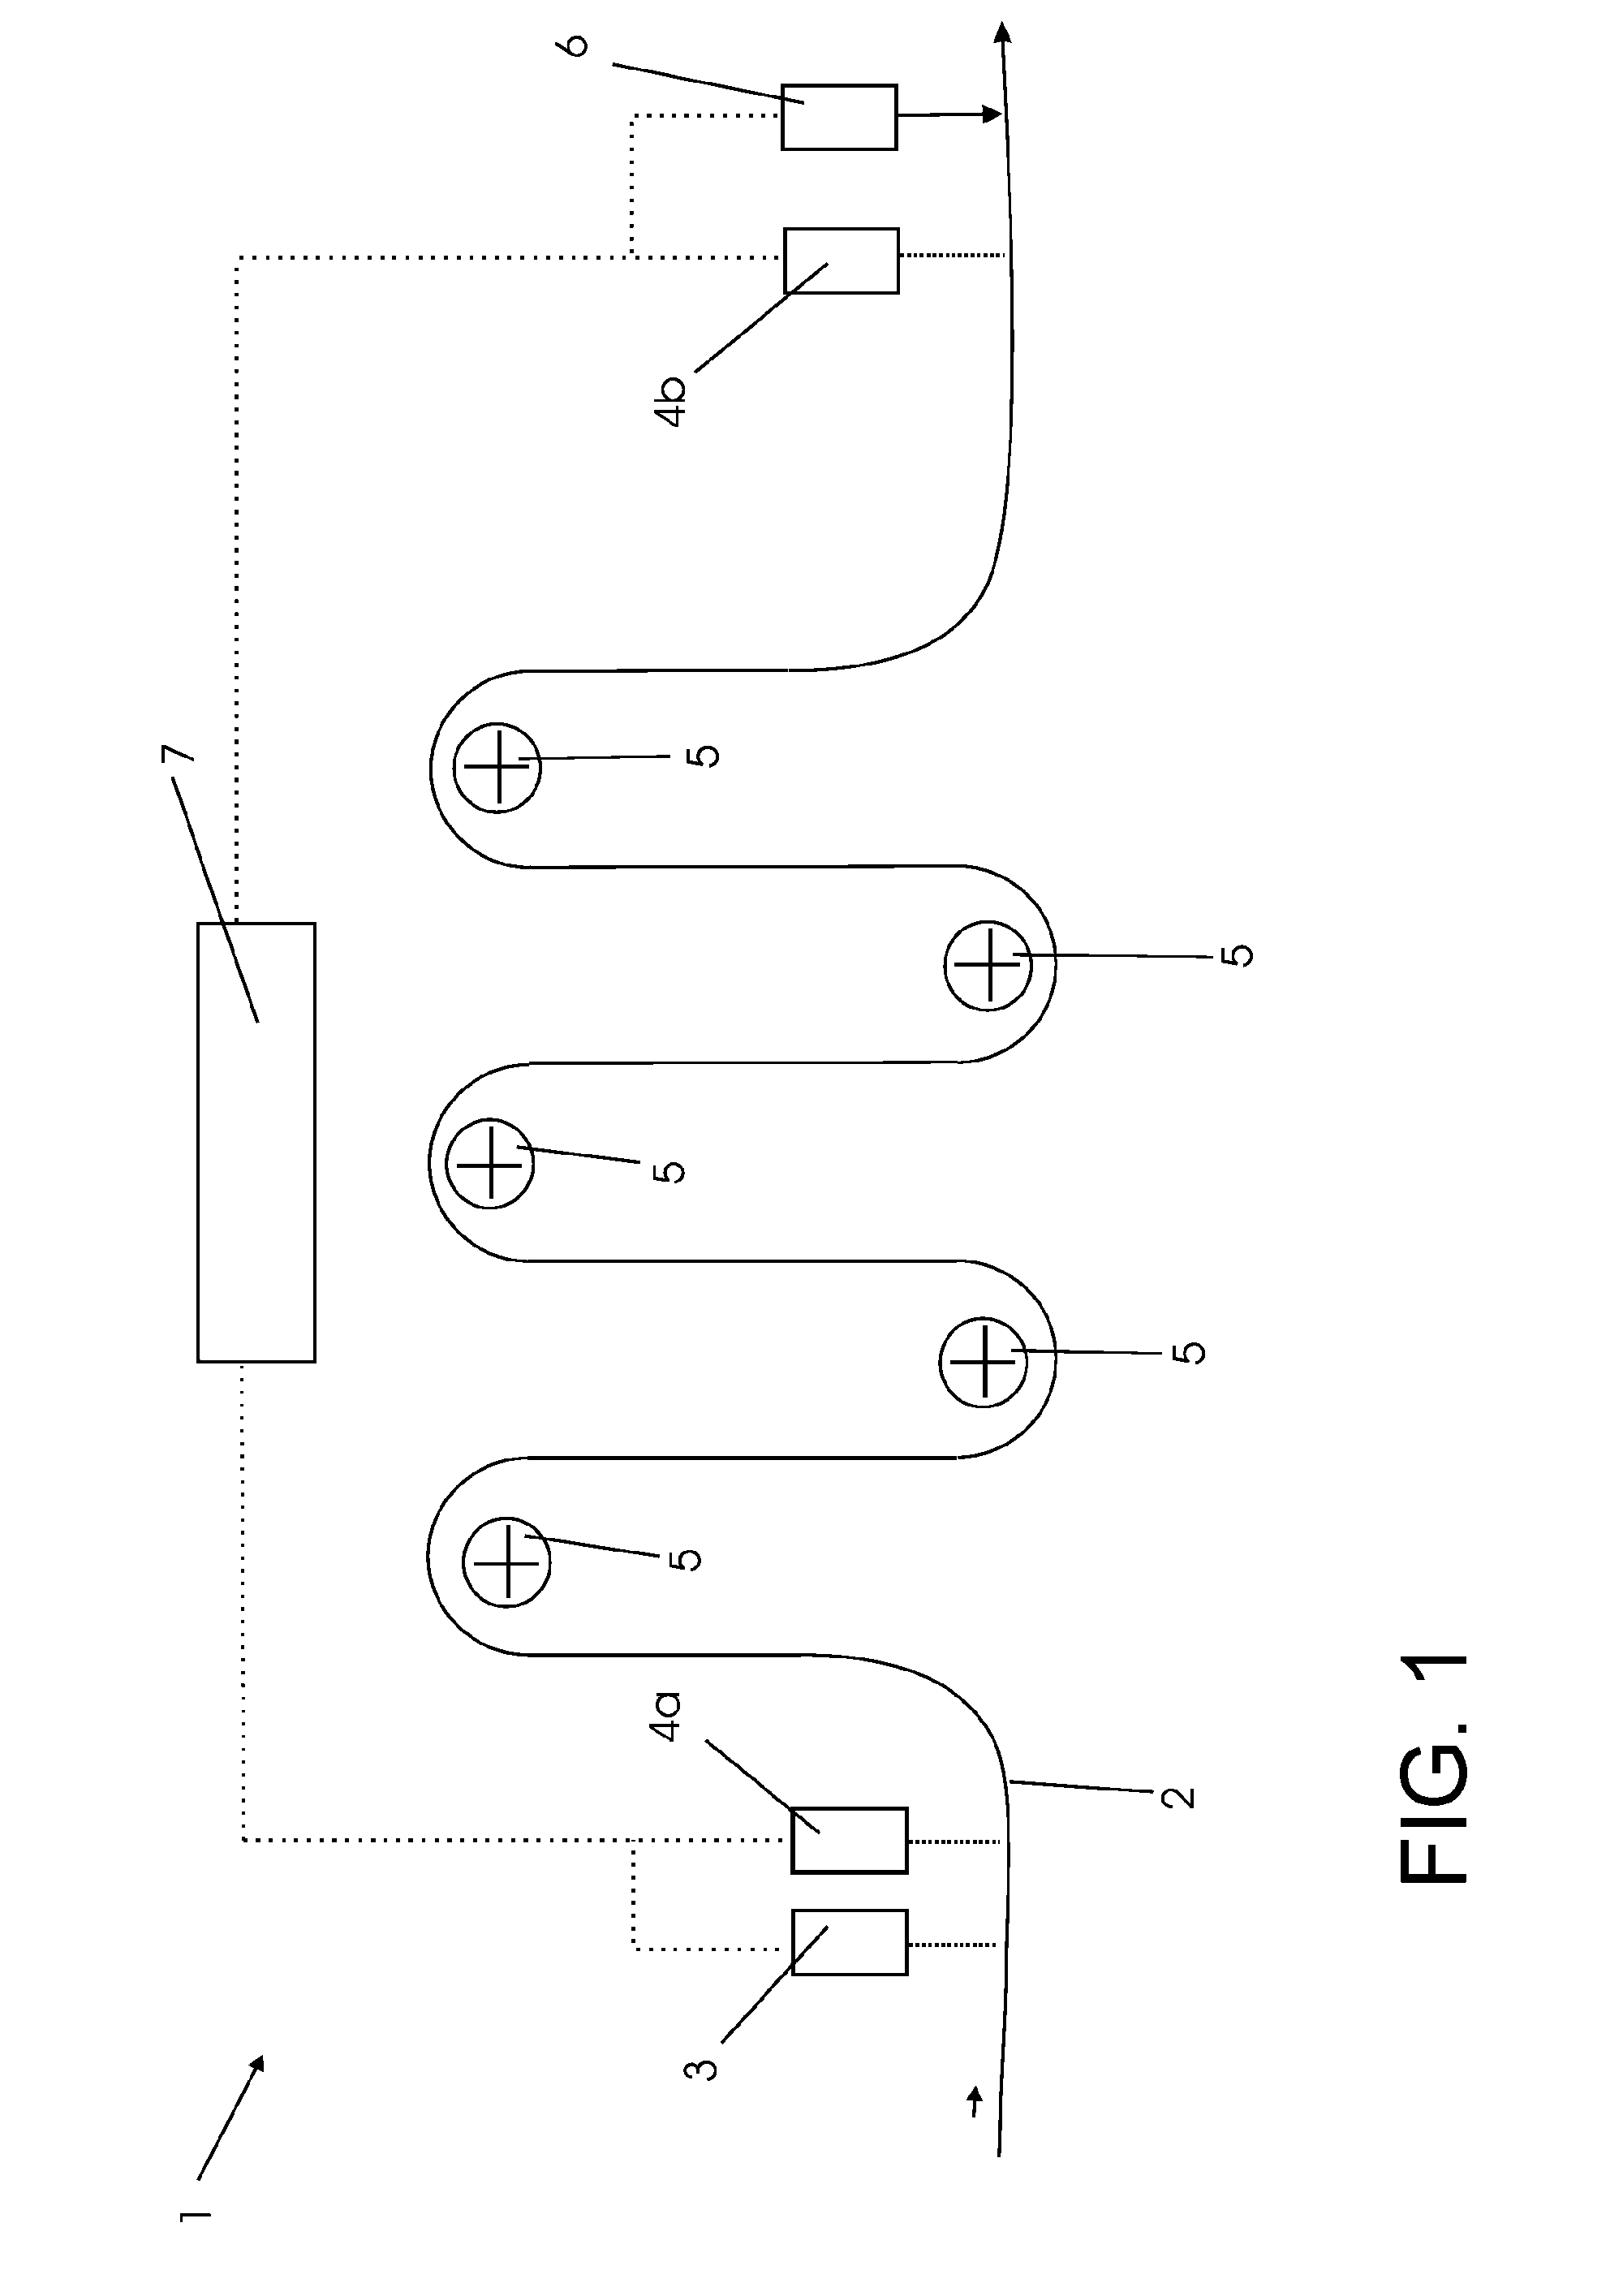 Apparatus and method for tracking defects in sheet materials